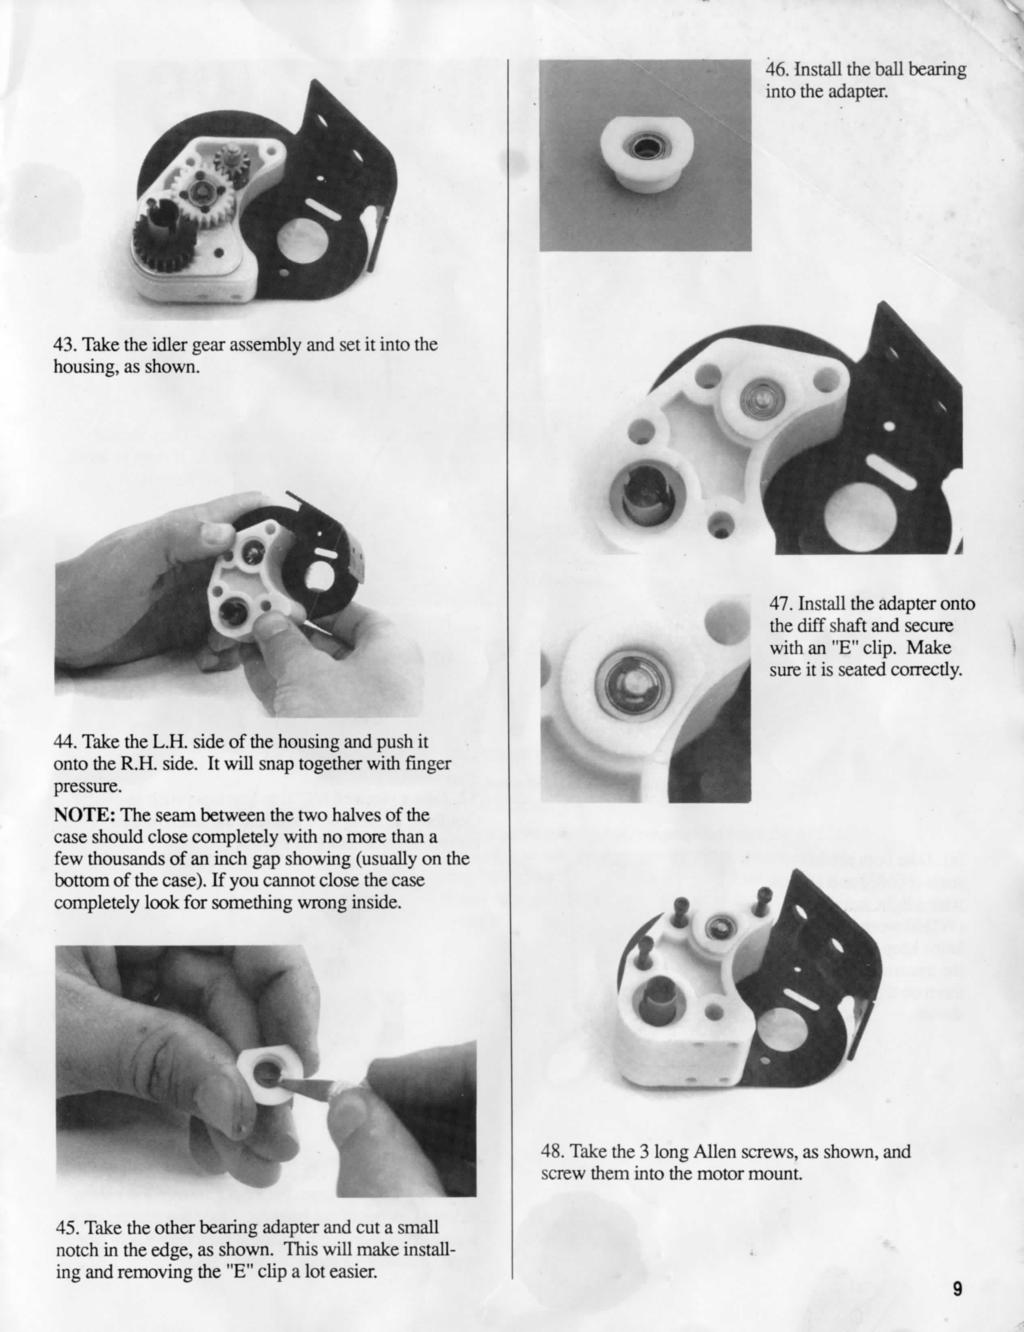 46. Install the ball bearing into the adapter. 43. Take the idler gear assembly and set it into the housing, as shown. 47. Install the adapter onto the diff shaft and secure with an "E" clip.